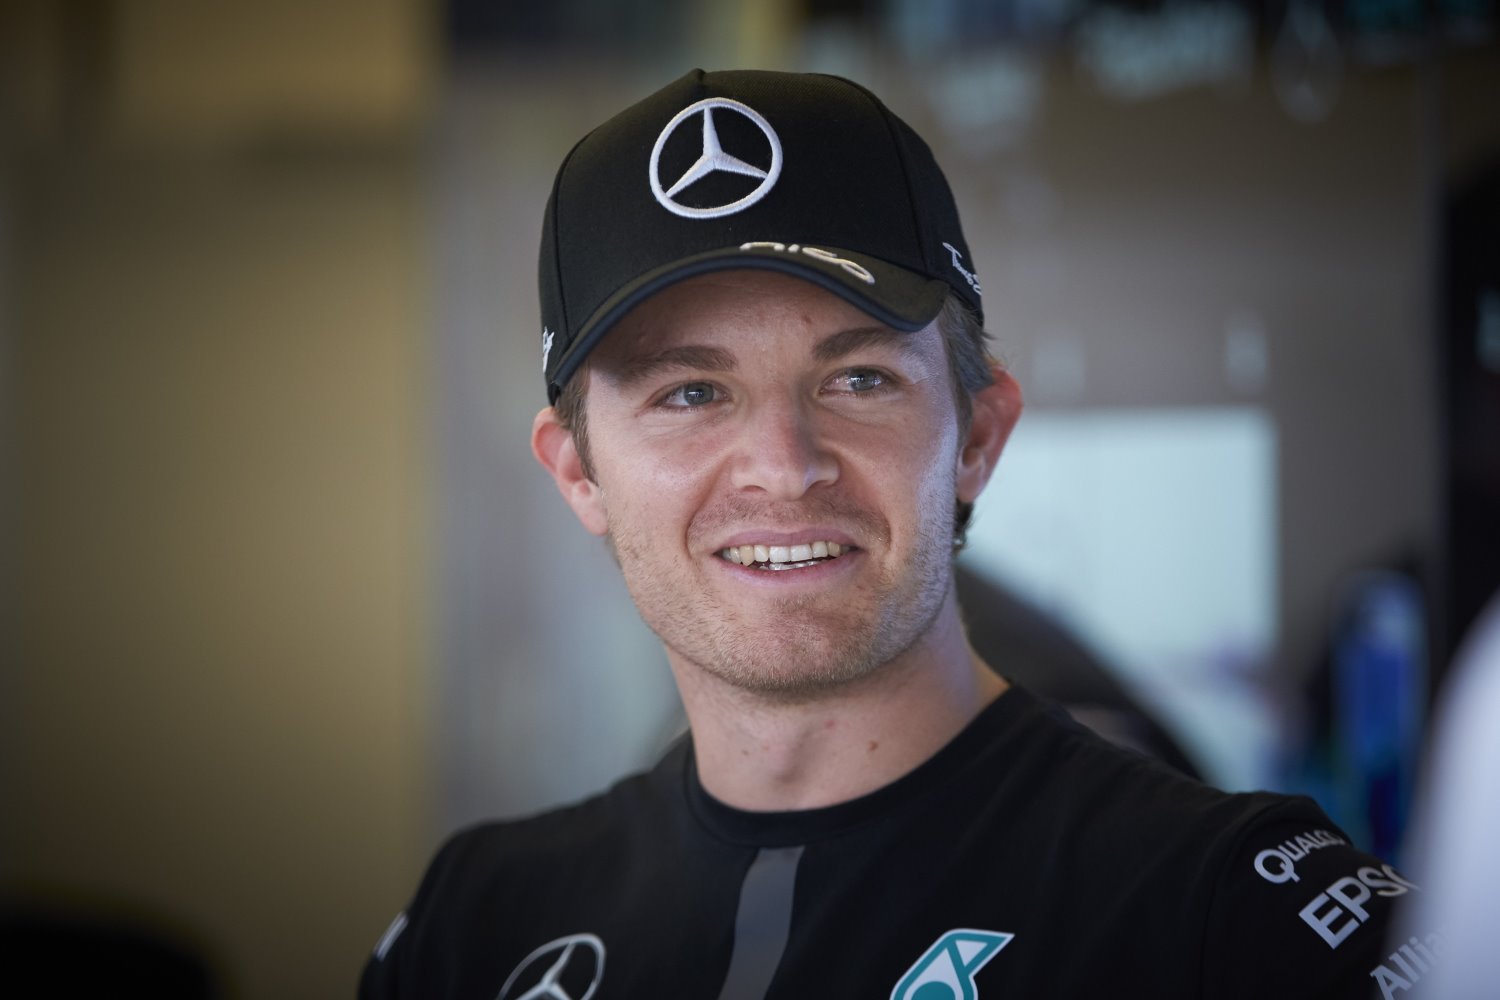 Rosberg could not handle all that Mercedes power, momentarily lost control, and lost the race